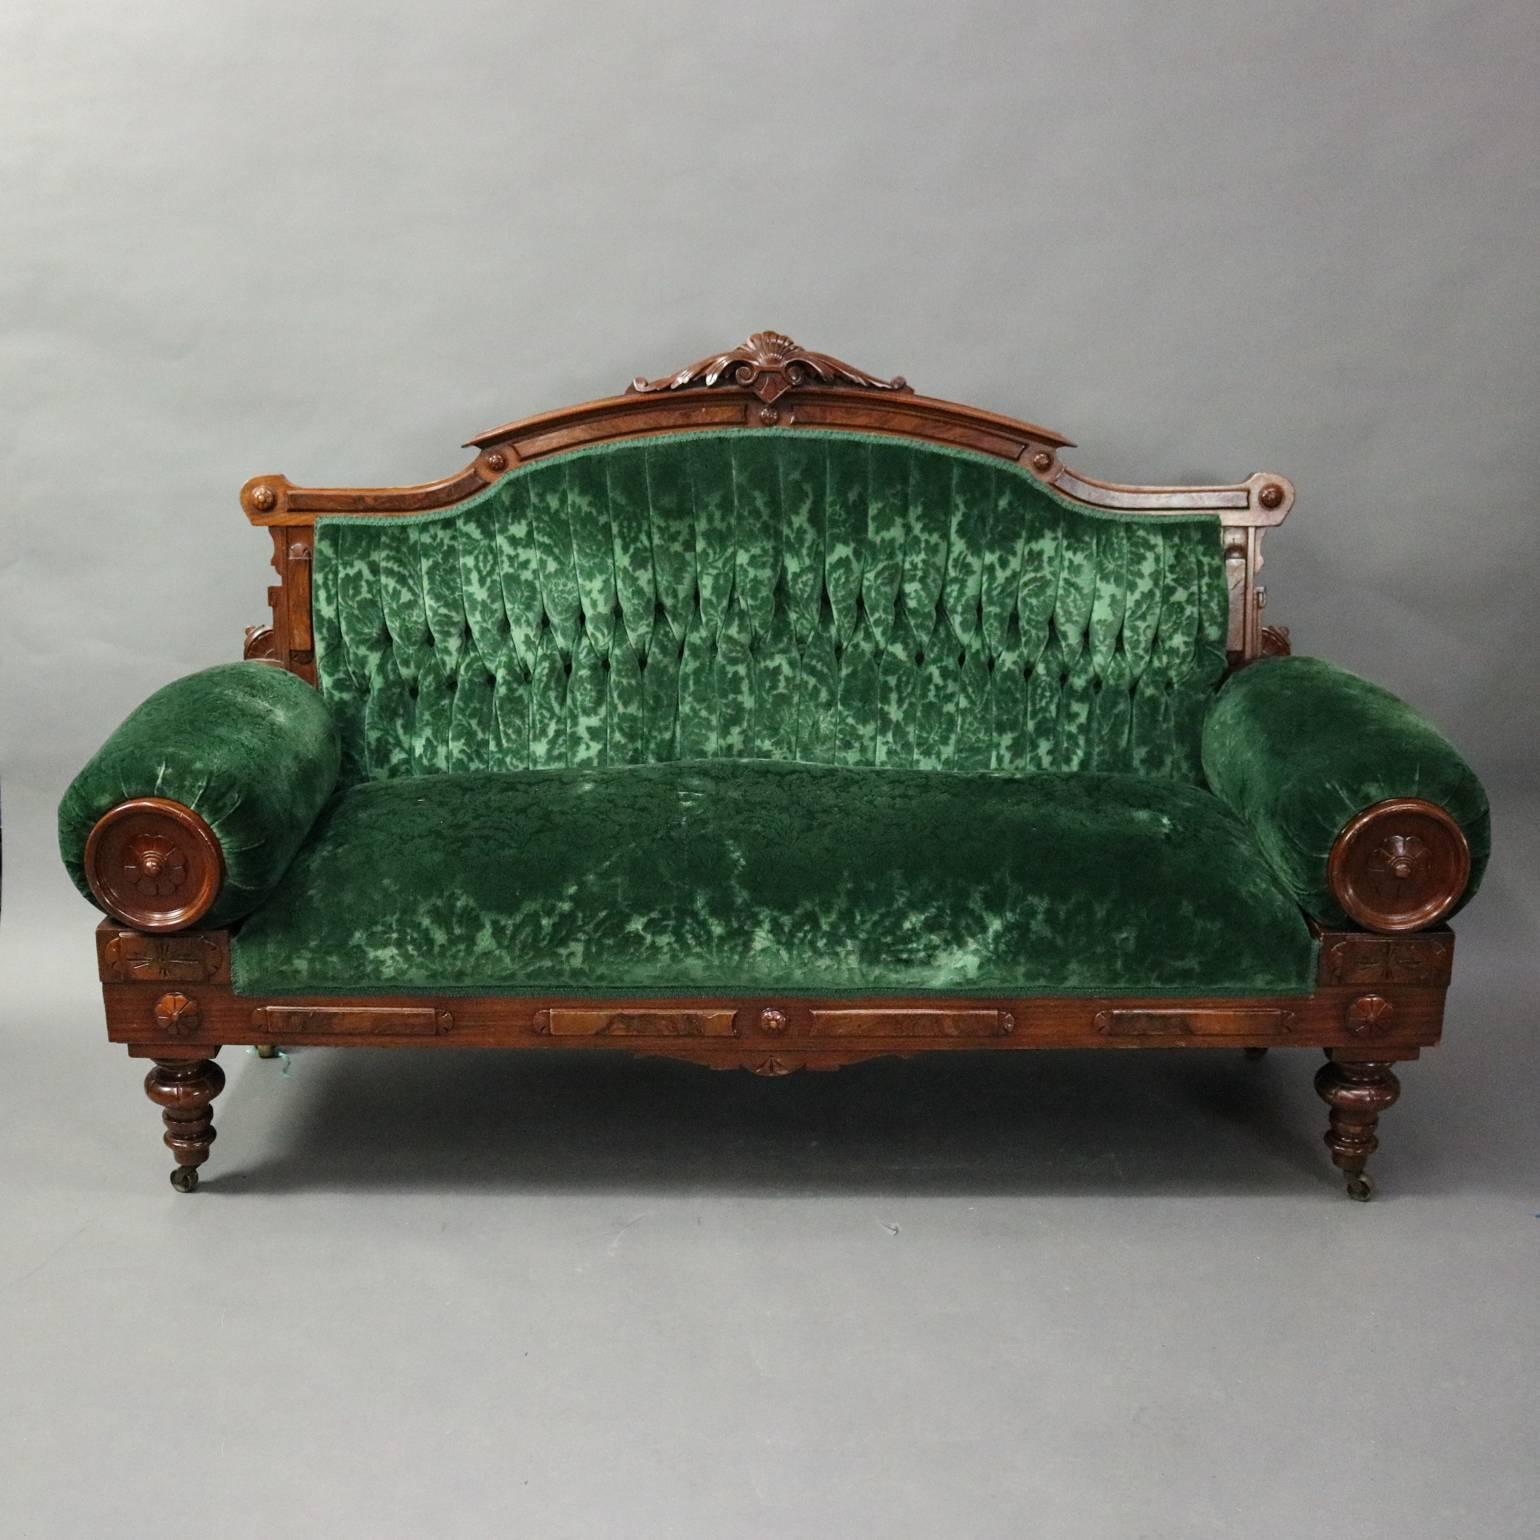 Antique Eastlake parlor set features walnut and burl frame with carved shell, acanthus, and rosettes, emerald green upholstery; includes settee, four side chairs, one armchair and footstool, circa 1880.

Measures: 43